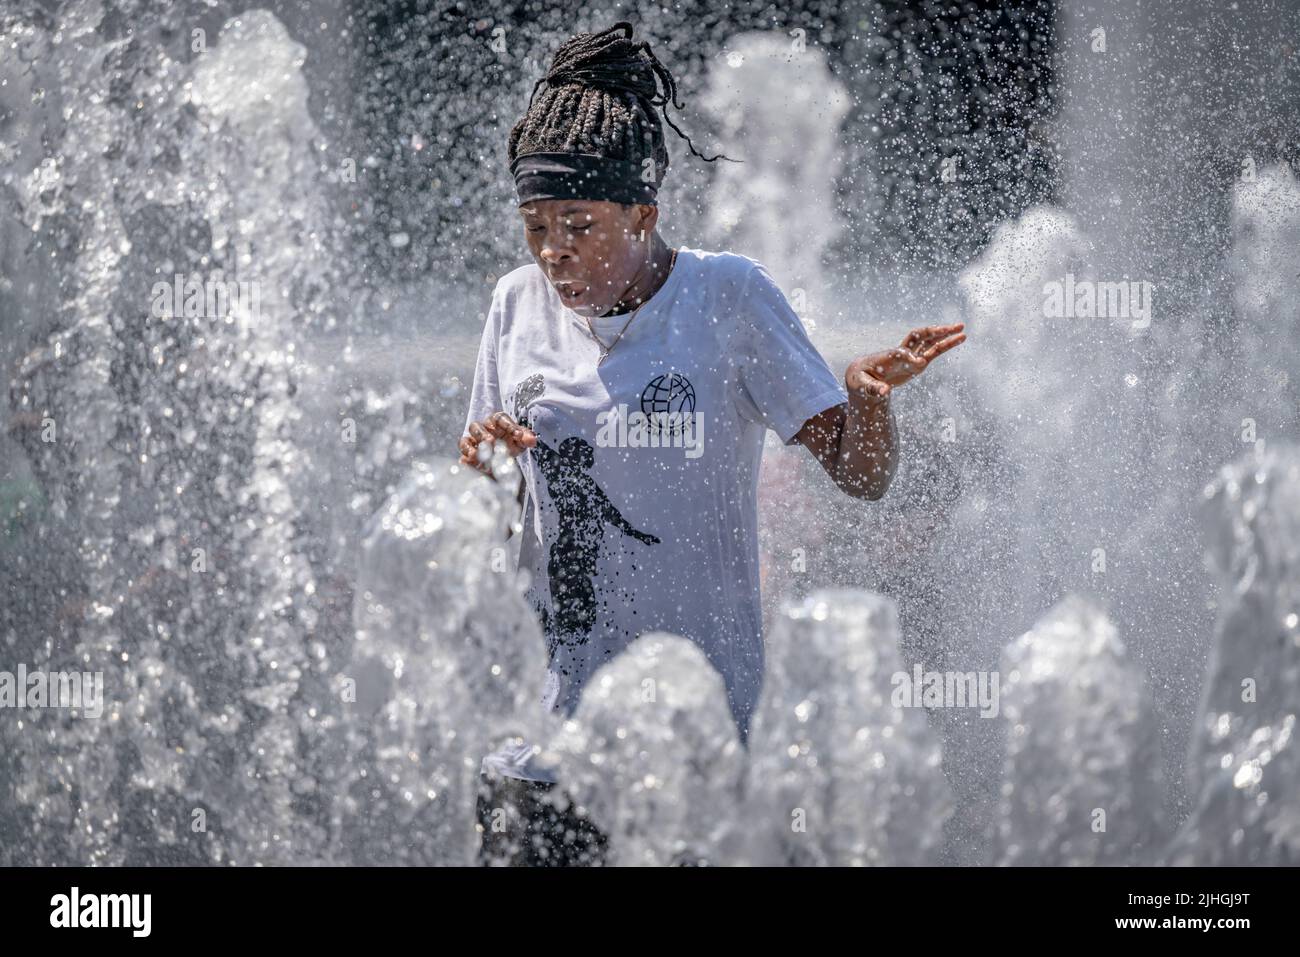 London, UK. 18th July, 2022. UK Weather: Heatwave Monday. Locals cool off in the Wembley Park water fountains as temperatures continue to rise with an amber alert in place for extreme heat. Britain could soon experience its hottest day as Met Office predicts Britain could hit 41C high. Credit: Guy Corbishley/Alamy Live News Stock Photo